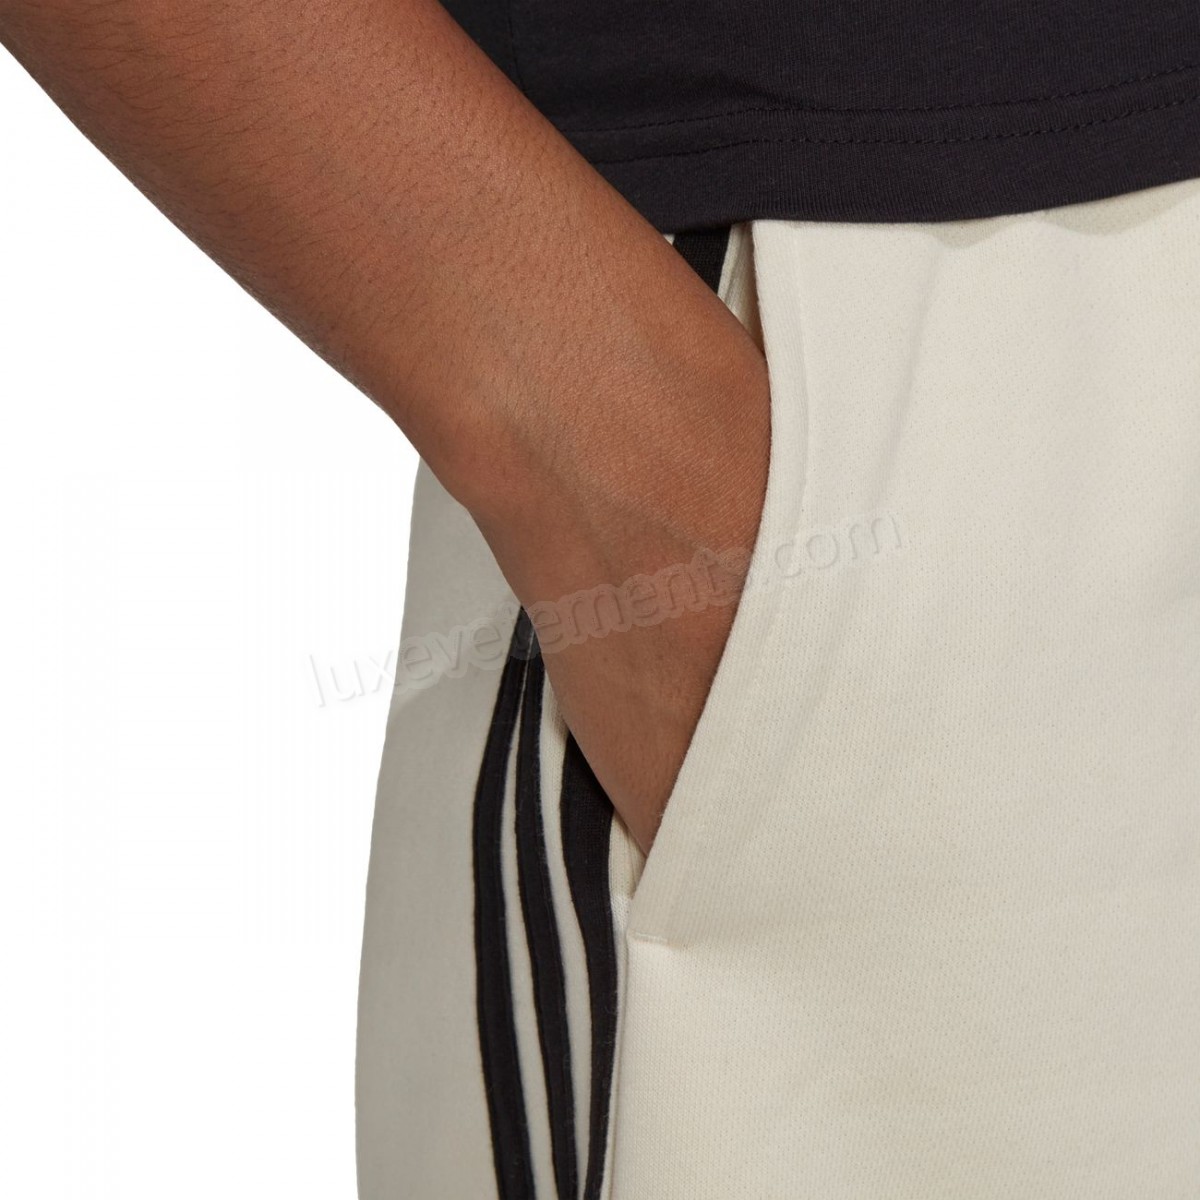 Adidas-Fitness femme ADIDAS Short femme adidas Must Haves Recycled Cotton Vente en ligne - -13